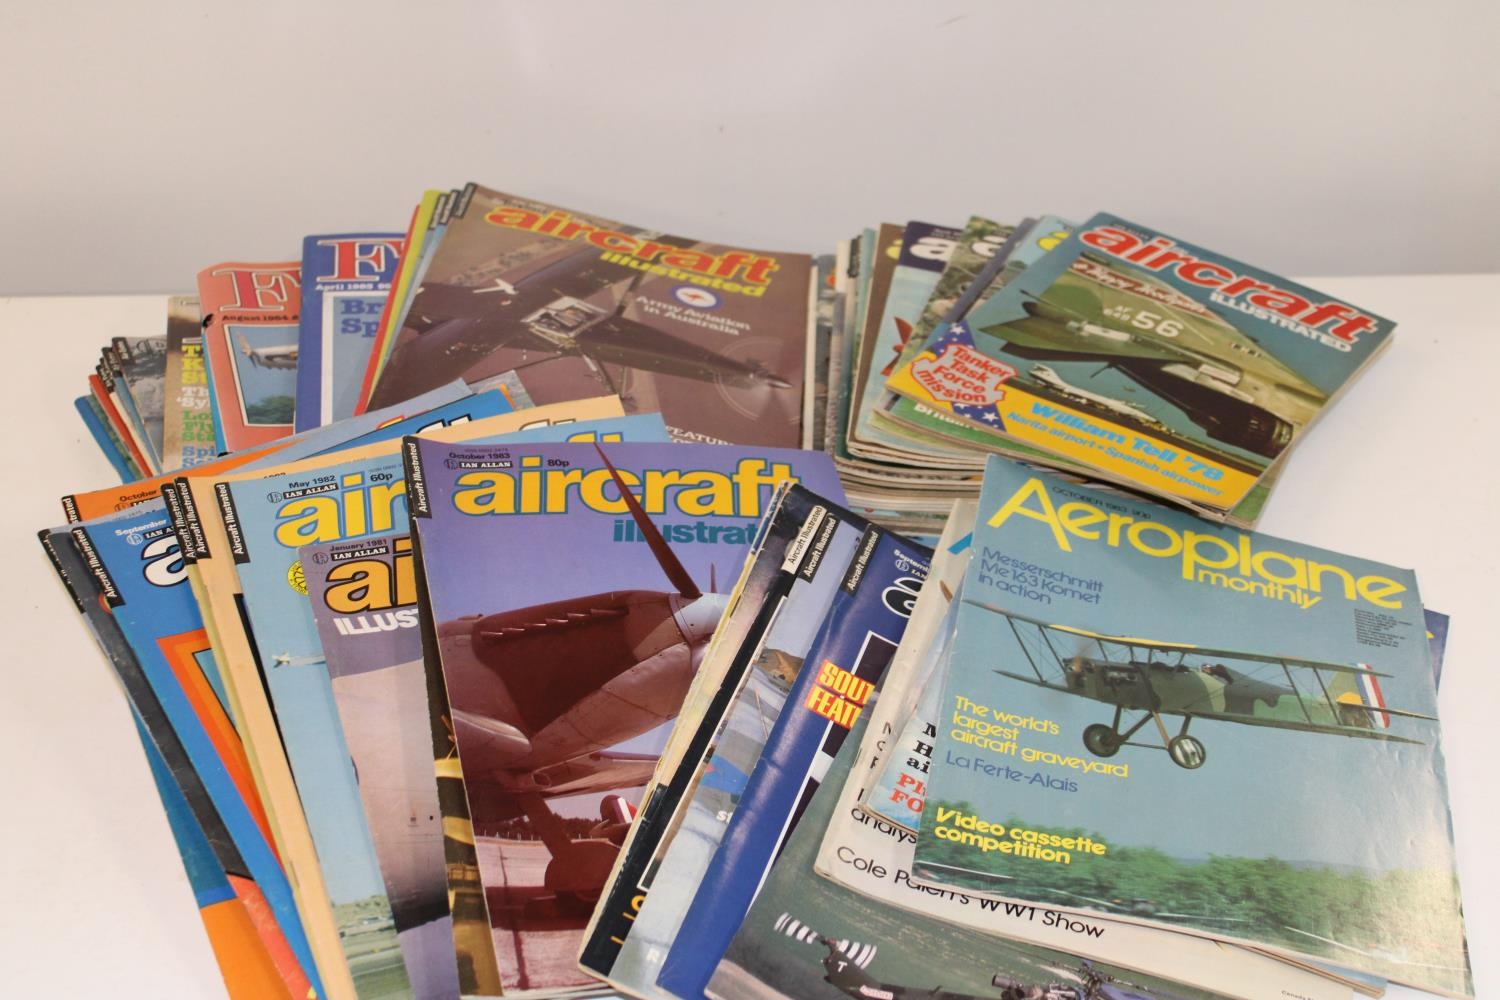 A job lot of vintage Aircraft Illustrated magazines